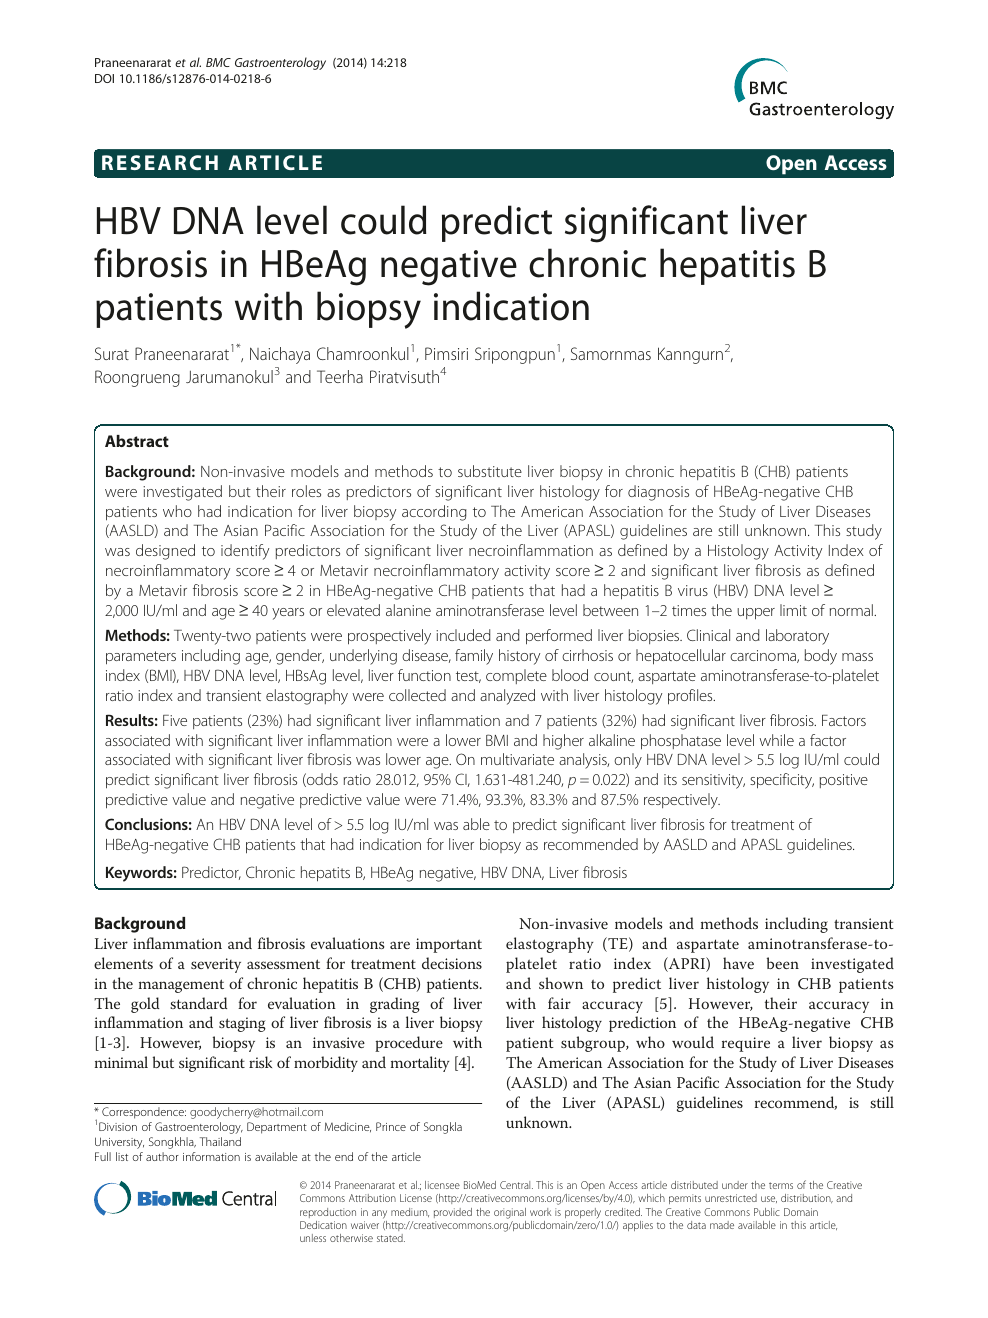 Hbv Dna Level Could Predict Significant Liver Fibrosis In Hbeag Negative Chronic Hepatitis B Patients With Biopsy Indication Topic Of Research Paper In Clinical Medicine Download Scholarly Article Pdf And Read